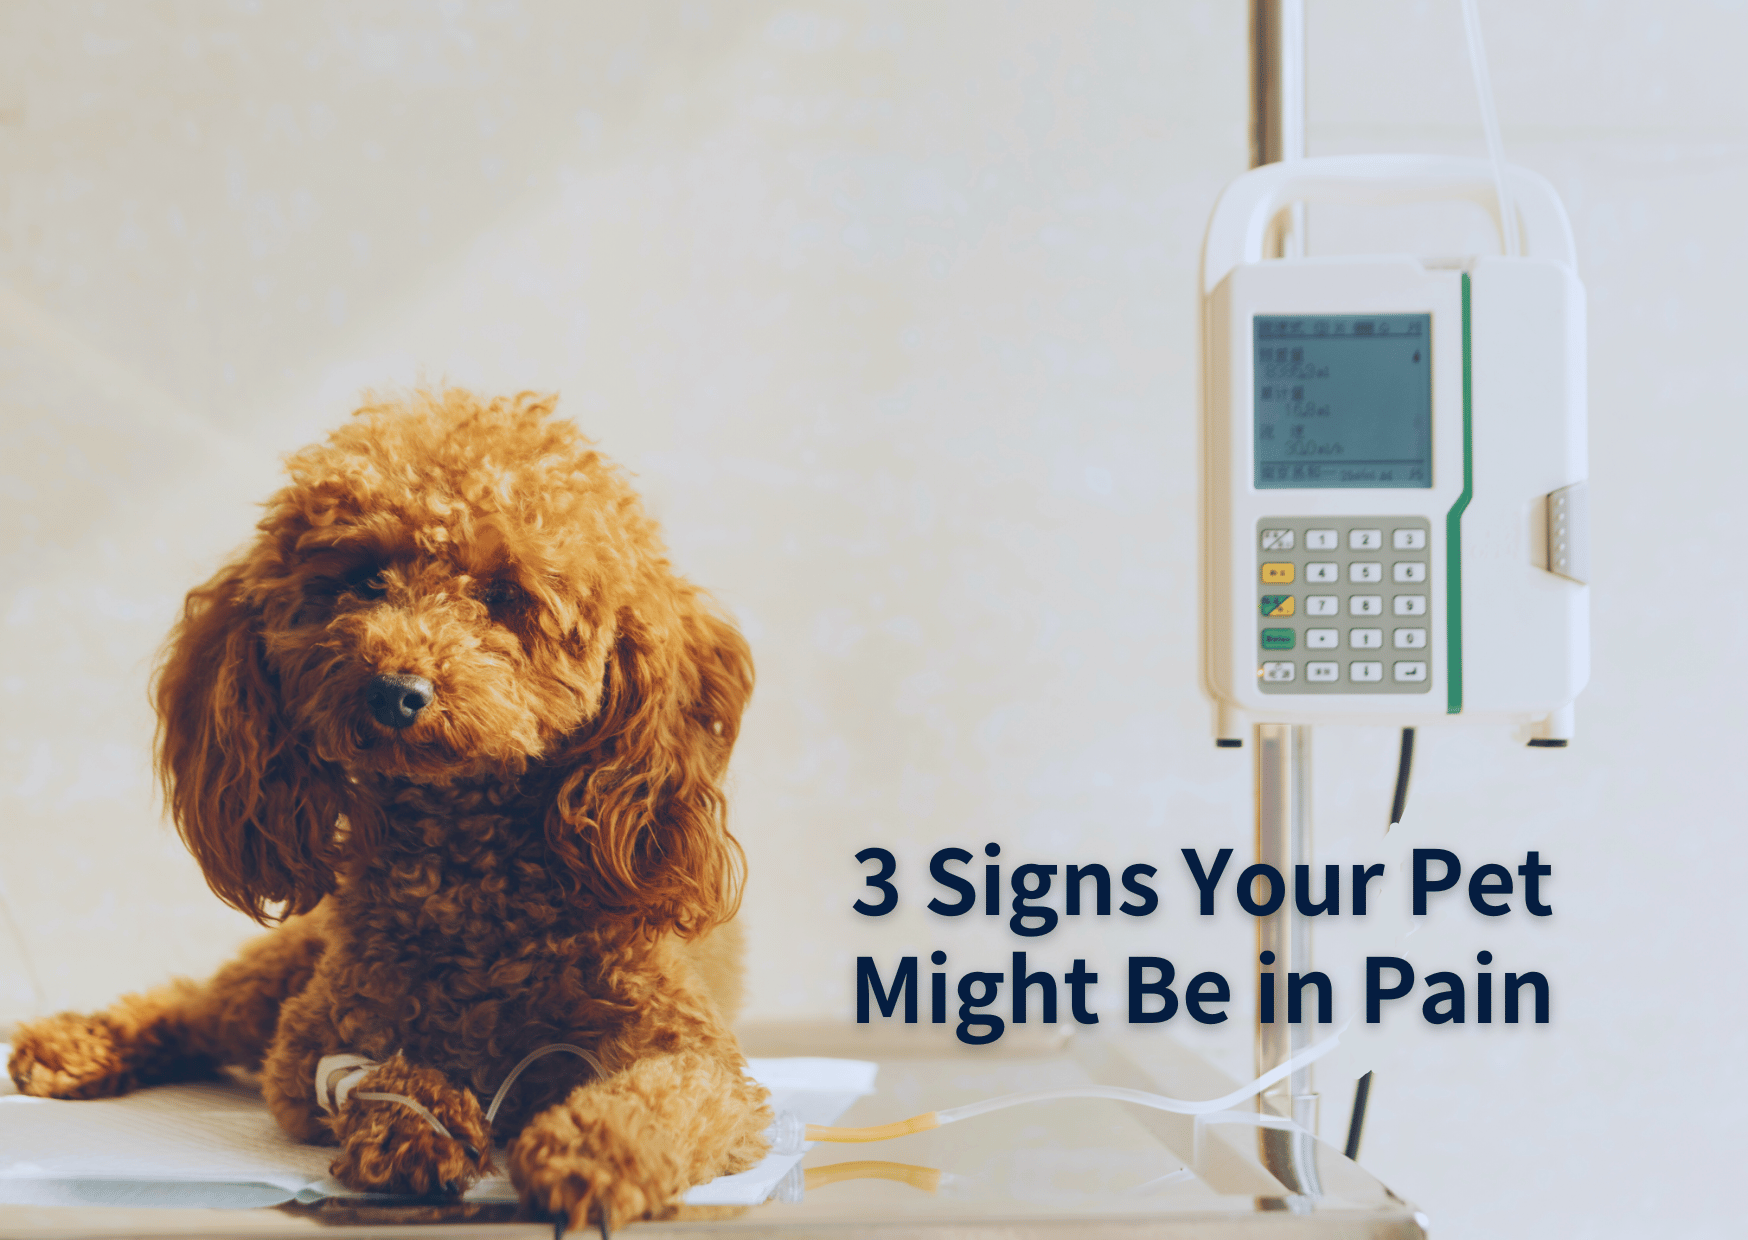 3 Signs Your Pet Might Be in Pain